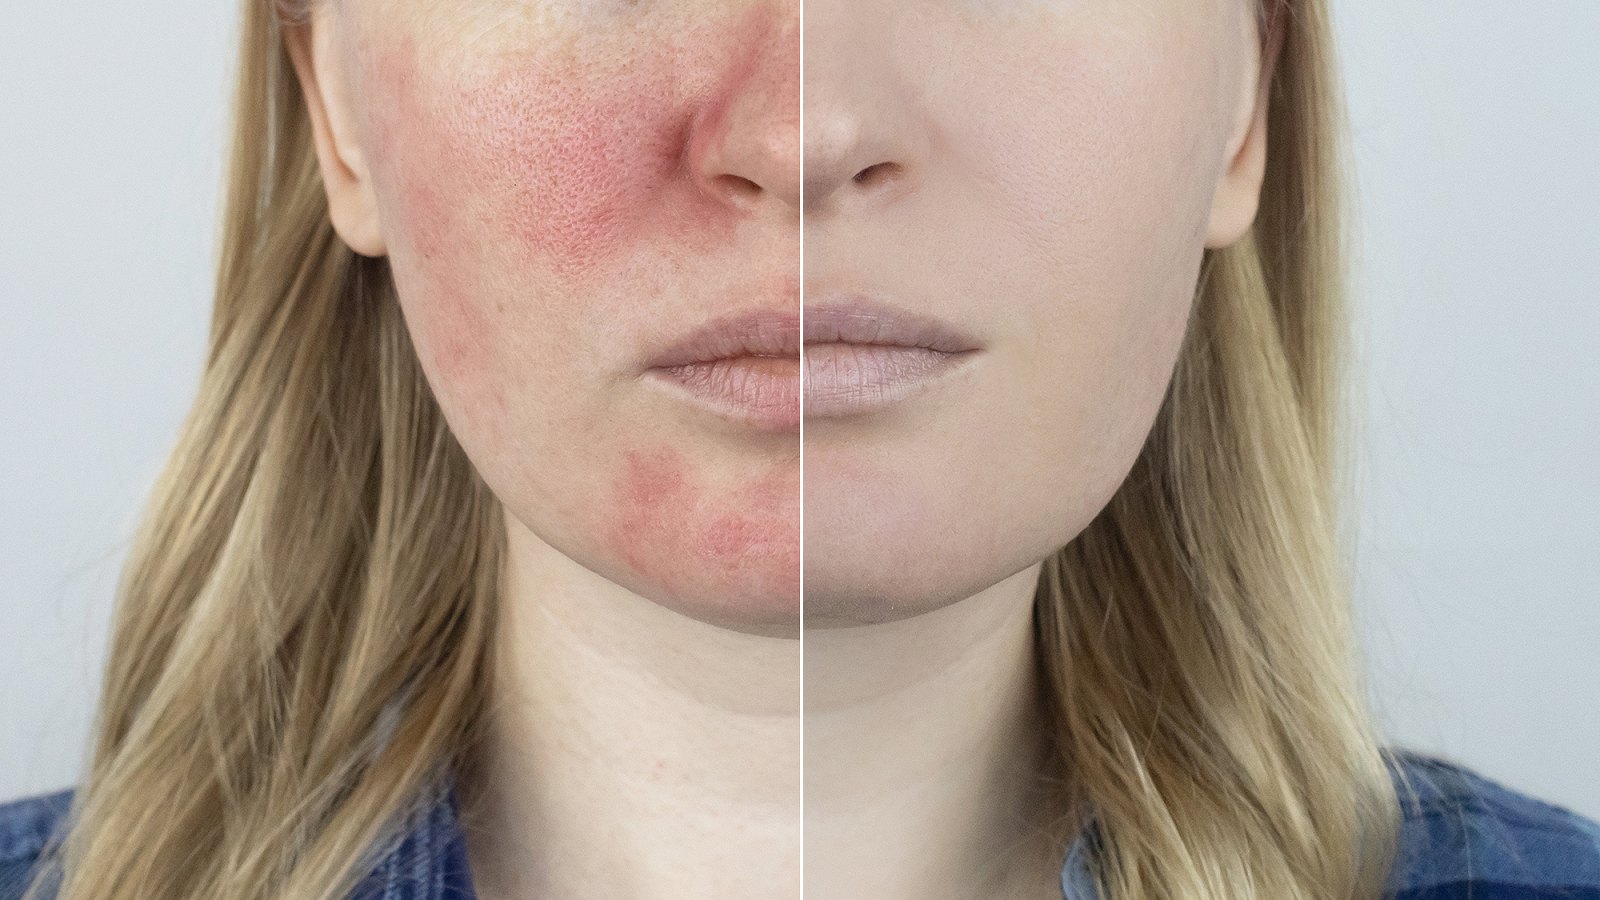 evian-facial-spray-red-irritatated-skin-before-after